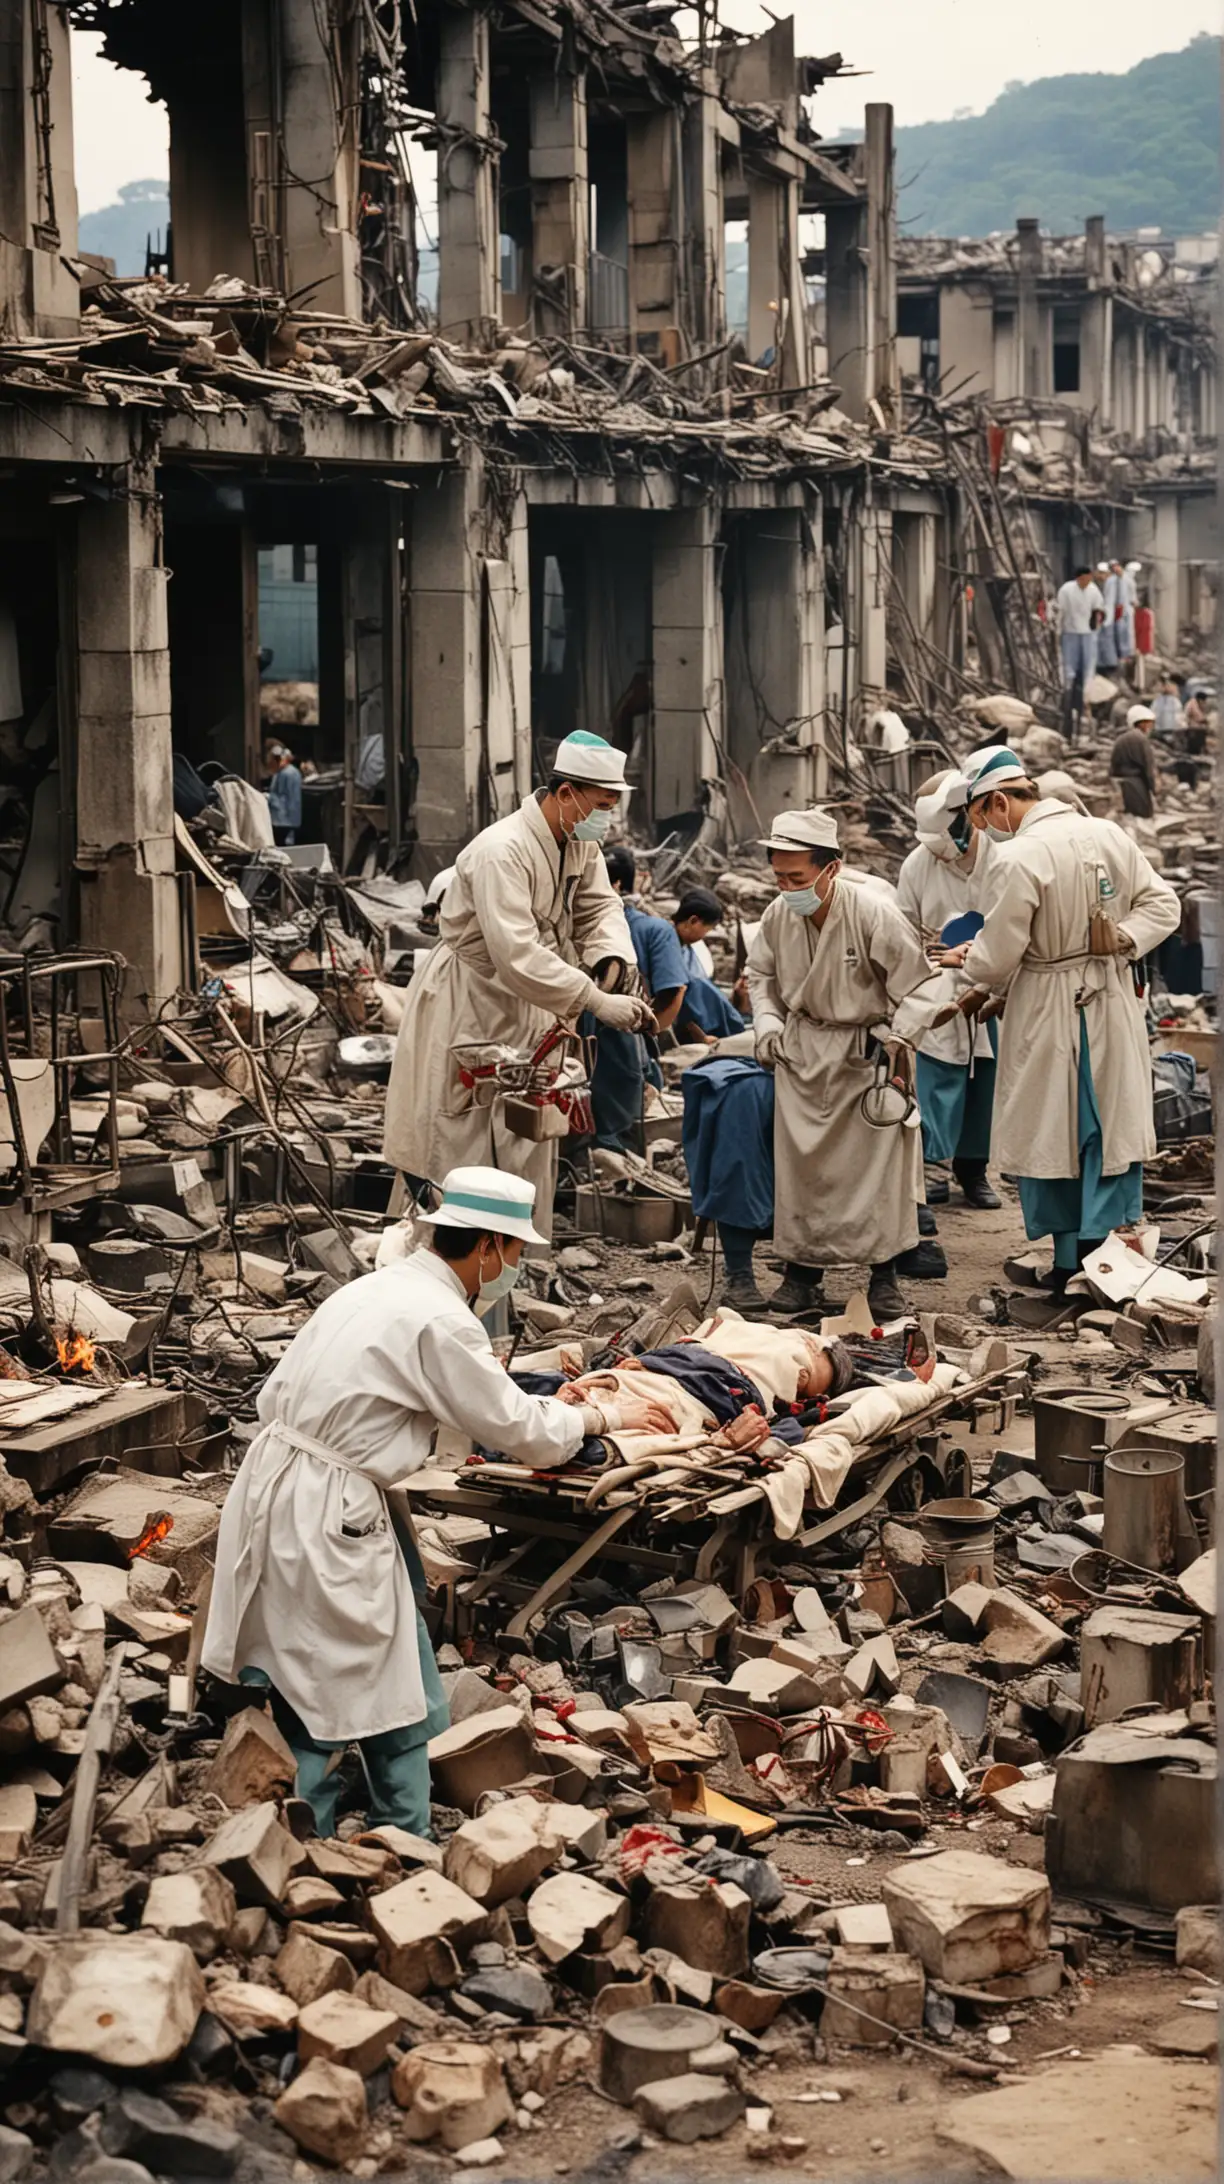 Medical Assistance in Hiroshima: Doctors and nurses providing medical assistance to burn victims and radiation patients in a makeshift hospital set up amidst the ruins of Hiroshima. colorful 